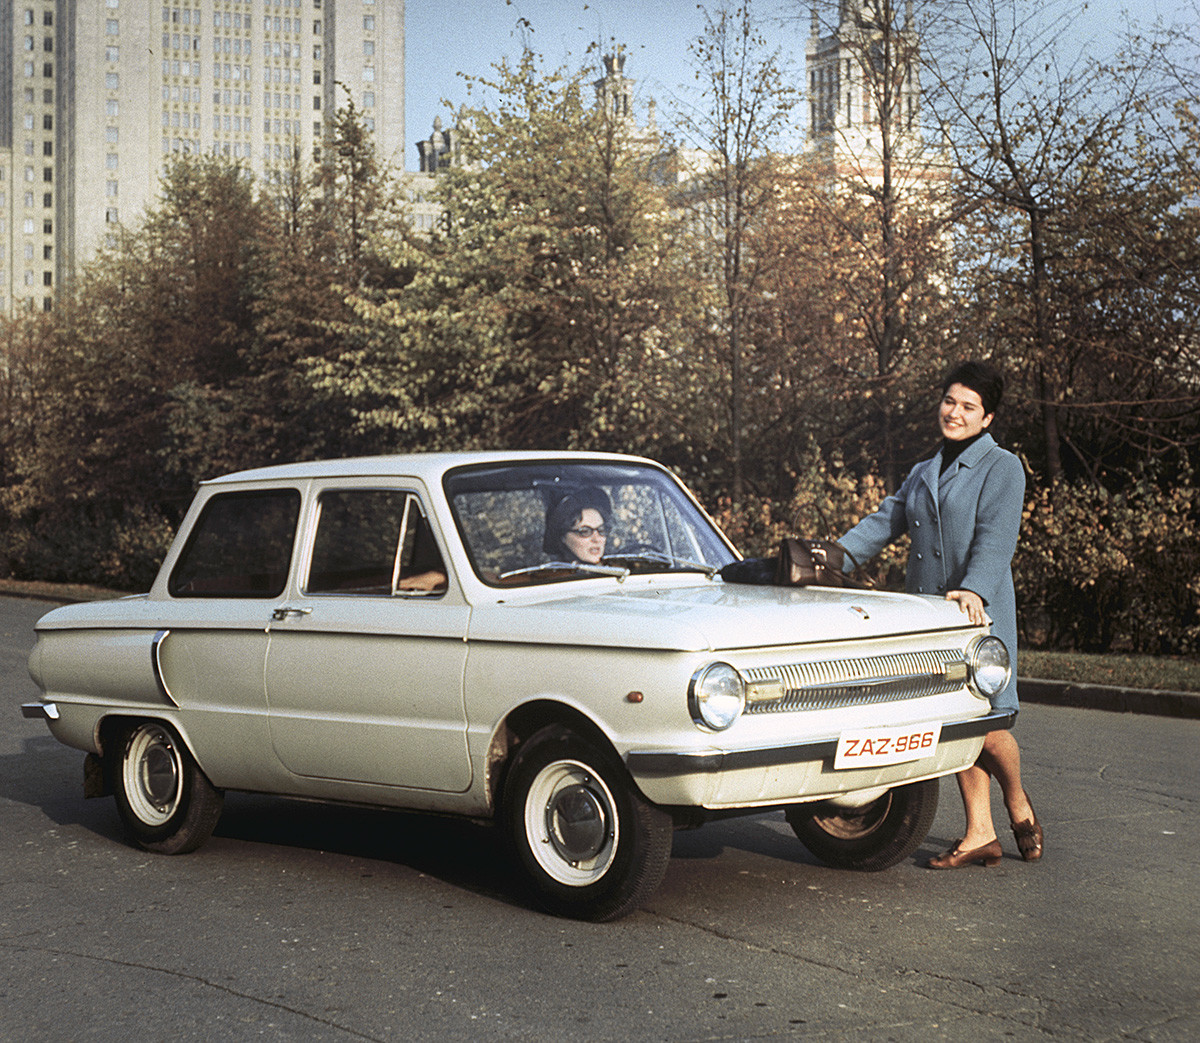 The ‘ZAZ-966’ from the Zaporozhye Automobile Factory (known simply as the ‘Zaporozhets’), produced in 1970.